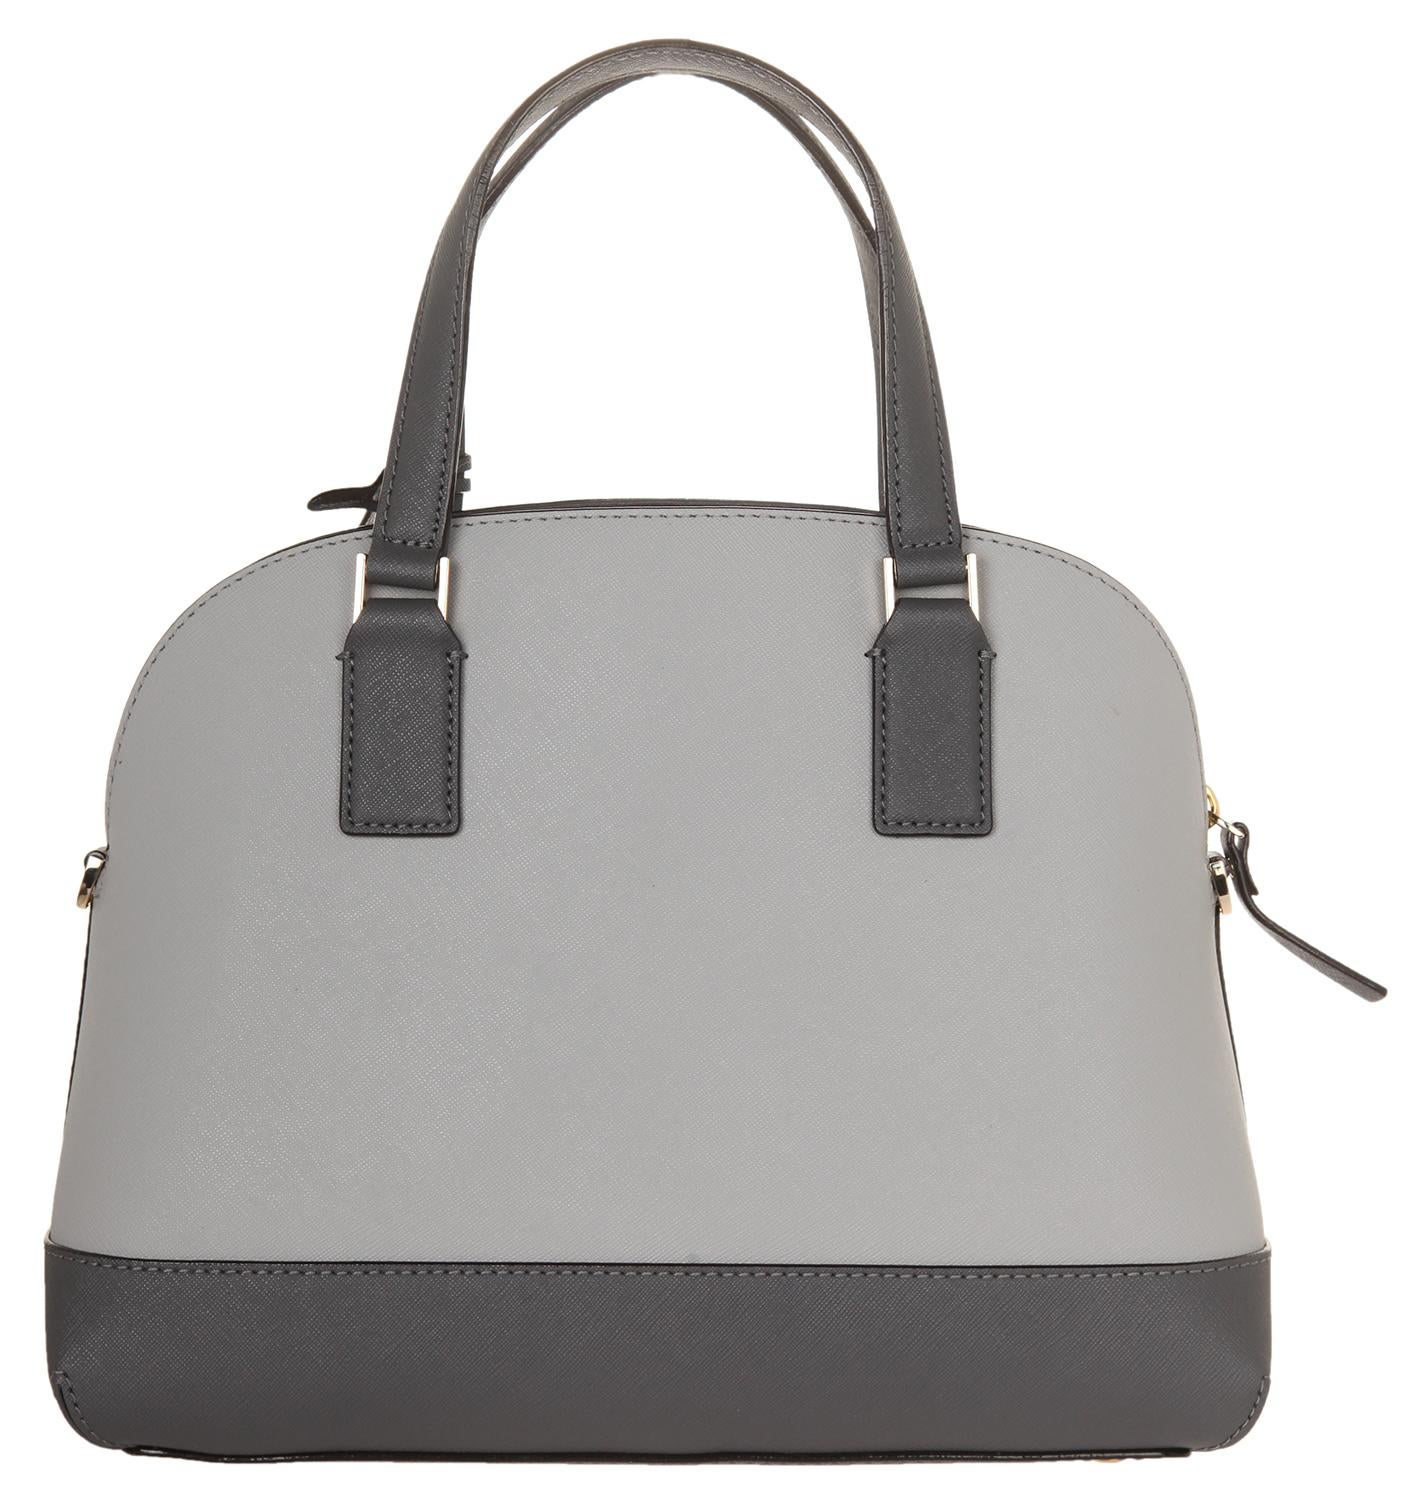 Item number PXRU8262-038 
Color steel grey
Exterior crosshatched leather
Lining 100% Polyester
Compartments: 1 main compartment (zipper compartment in the middle), 2 big slide compartments, 2 small slide compartments, 1 zipper compartment
Dimensions